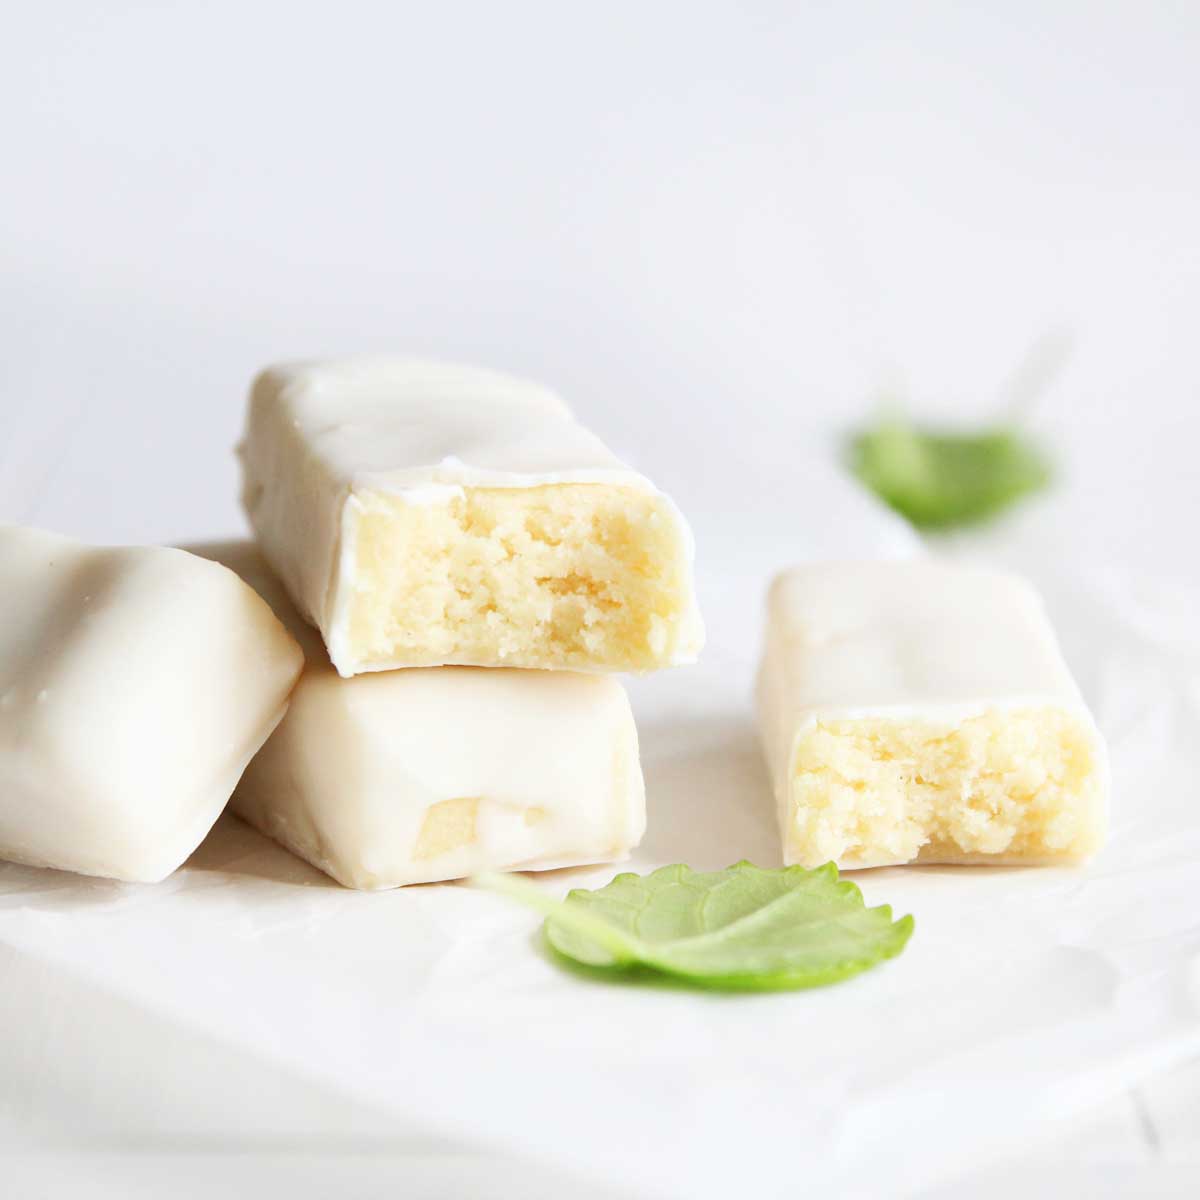 Healthy Homemade Lemon Protein Bars made with Collagen Peptides - Lentil Flatbread